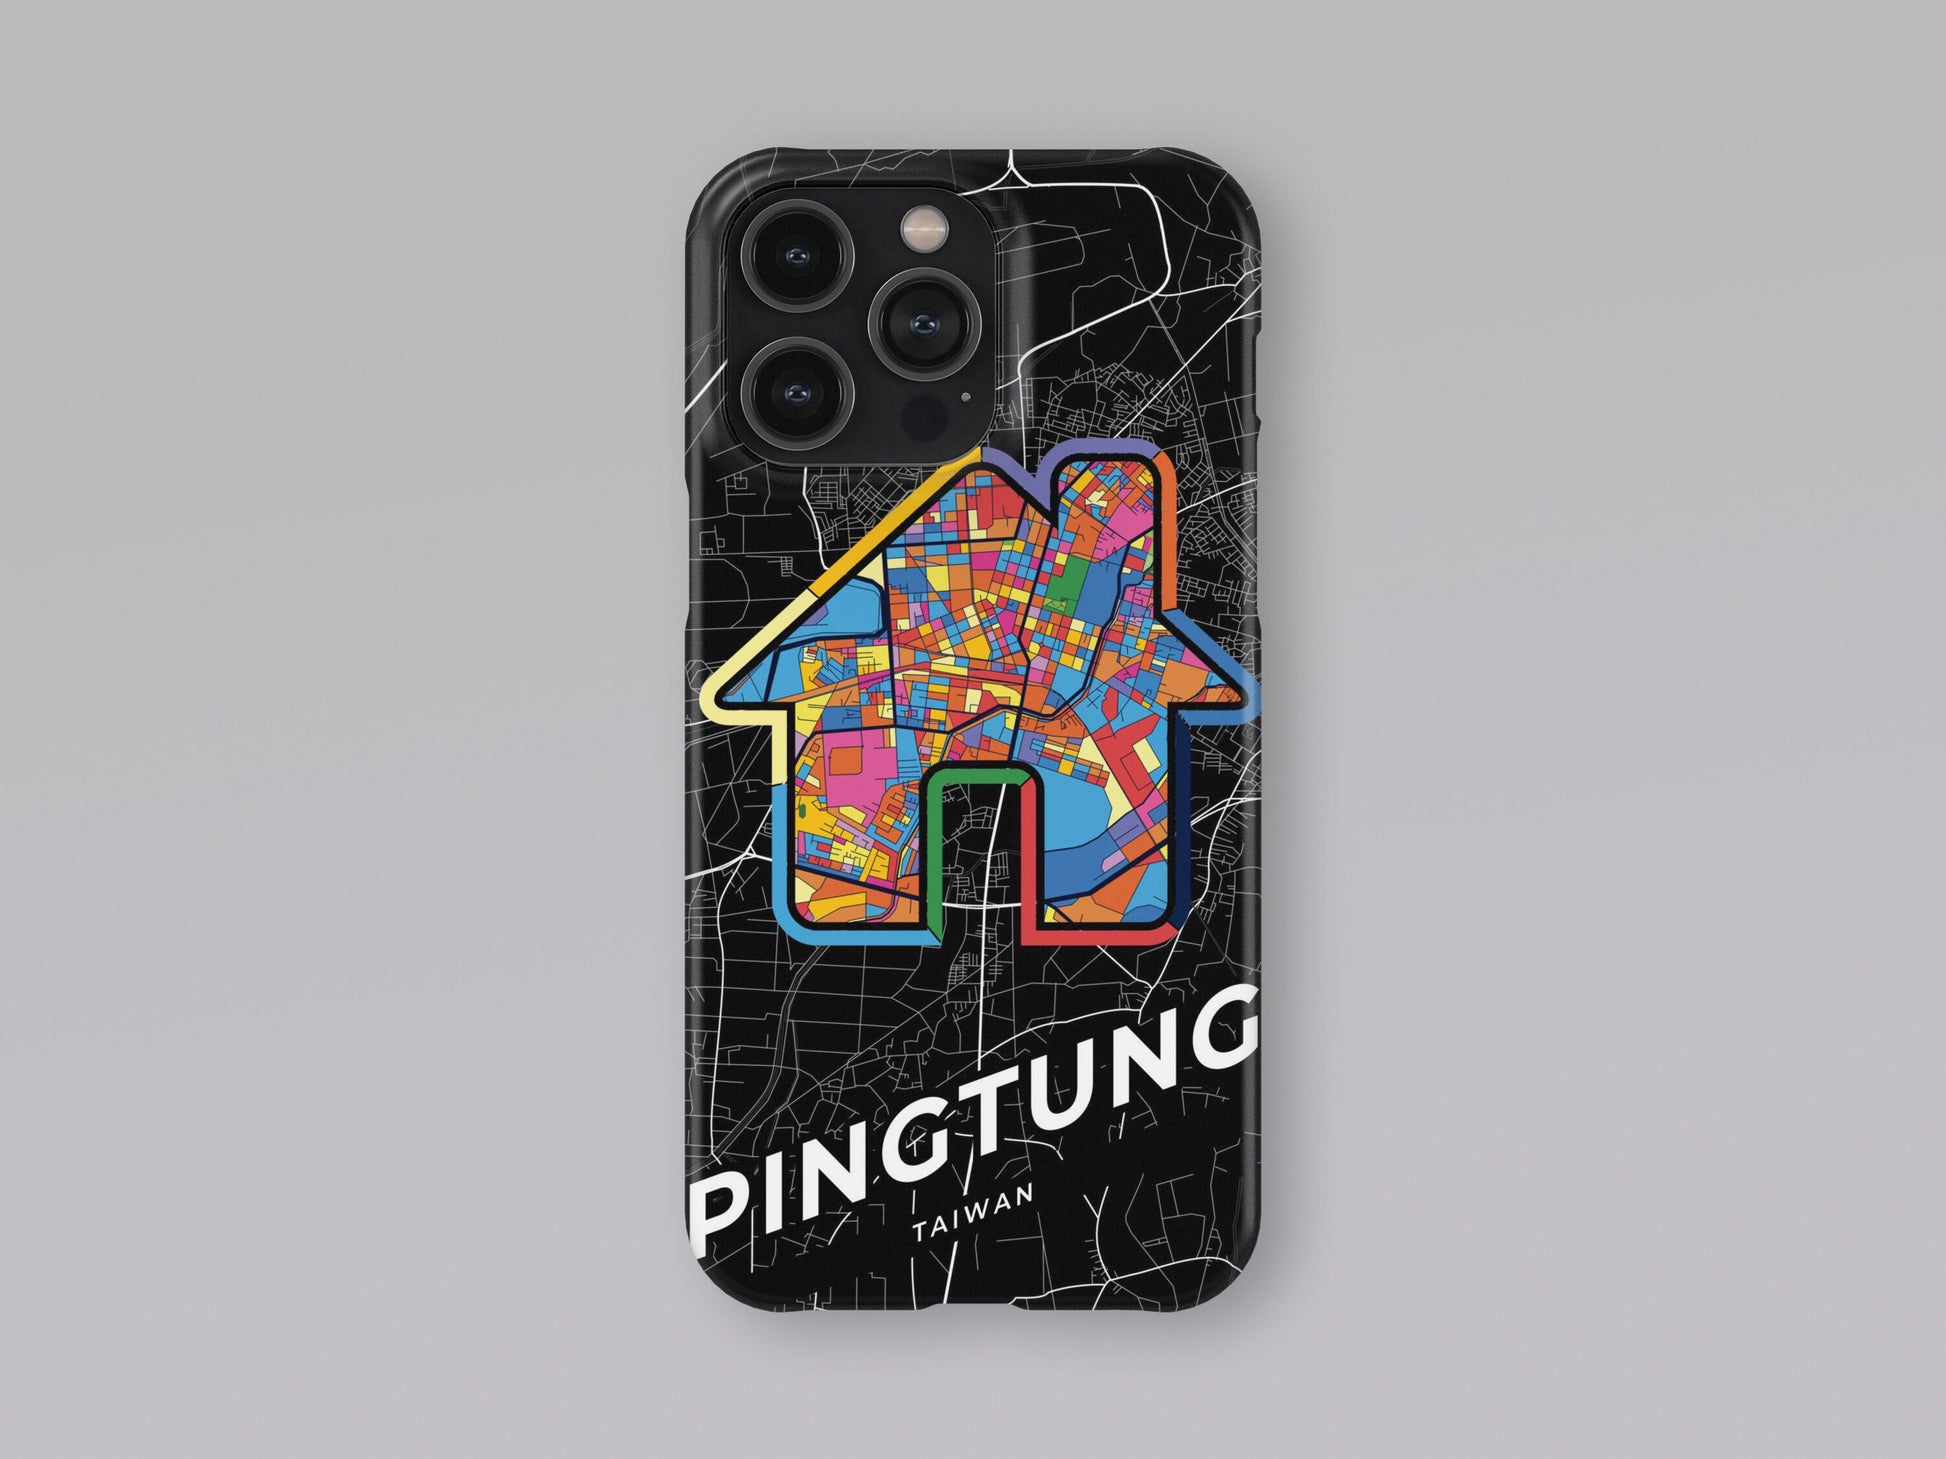 Pingtung Taiwan slim phone case with colorful icon 3